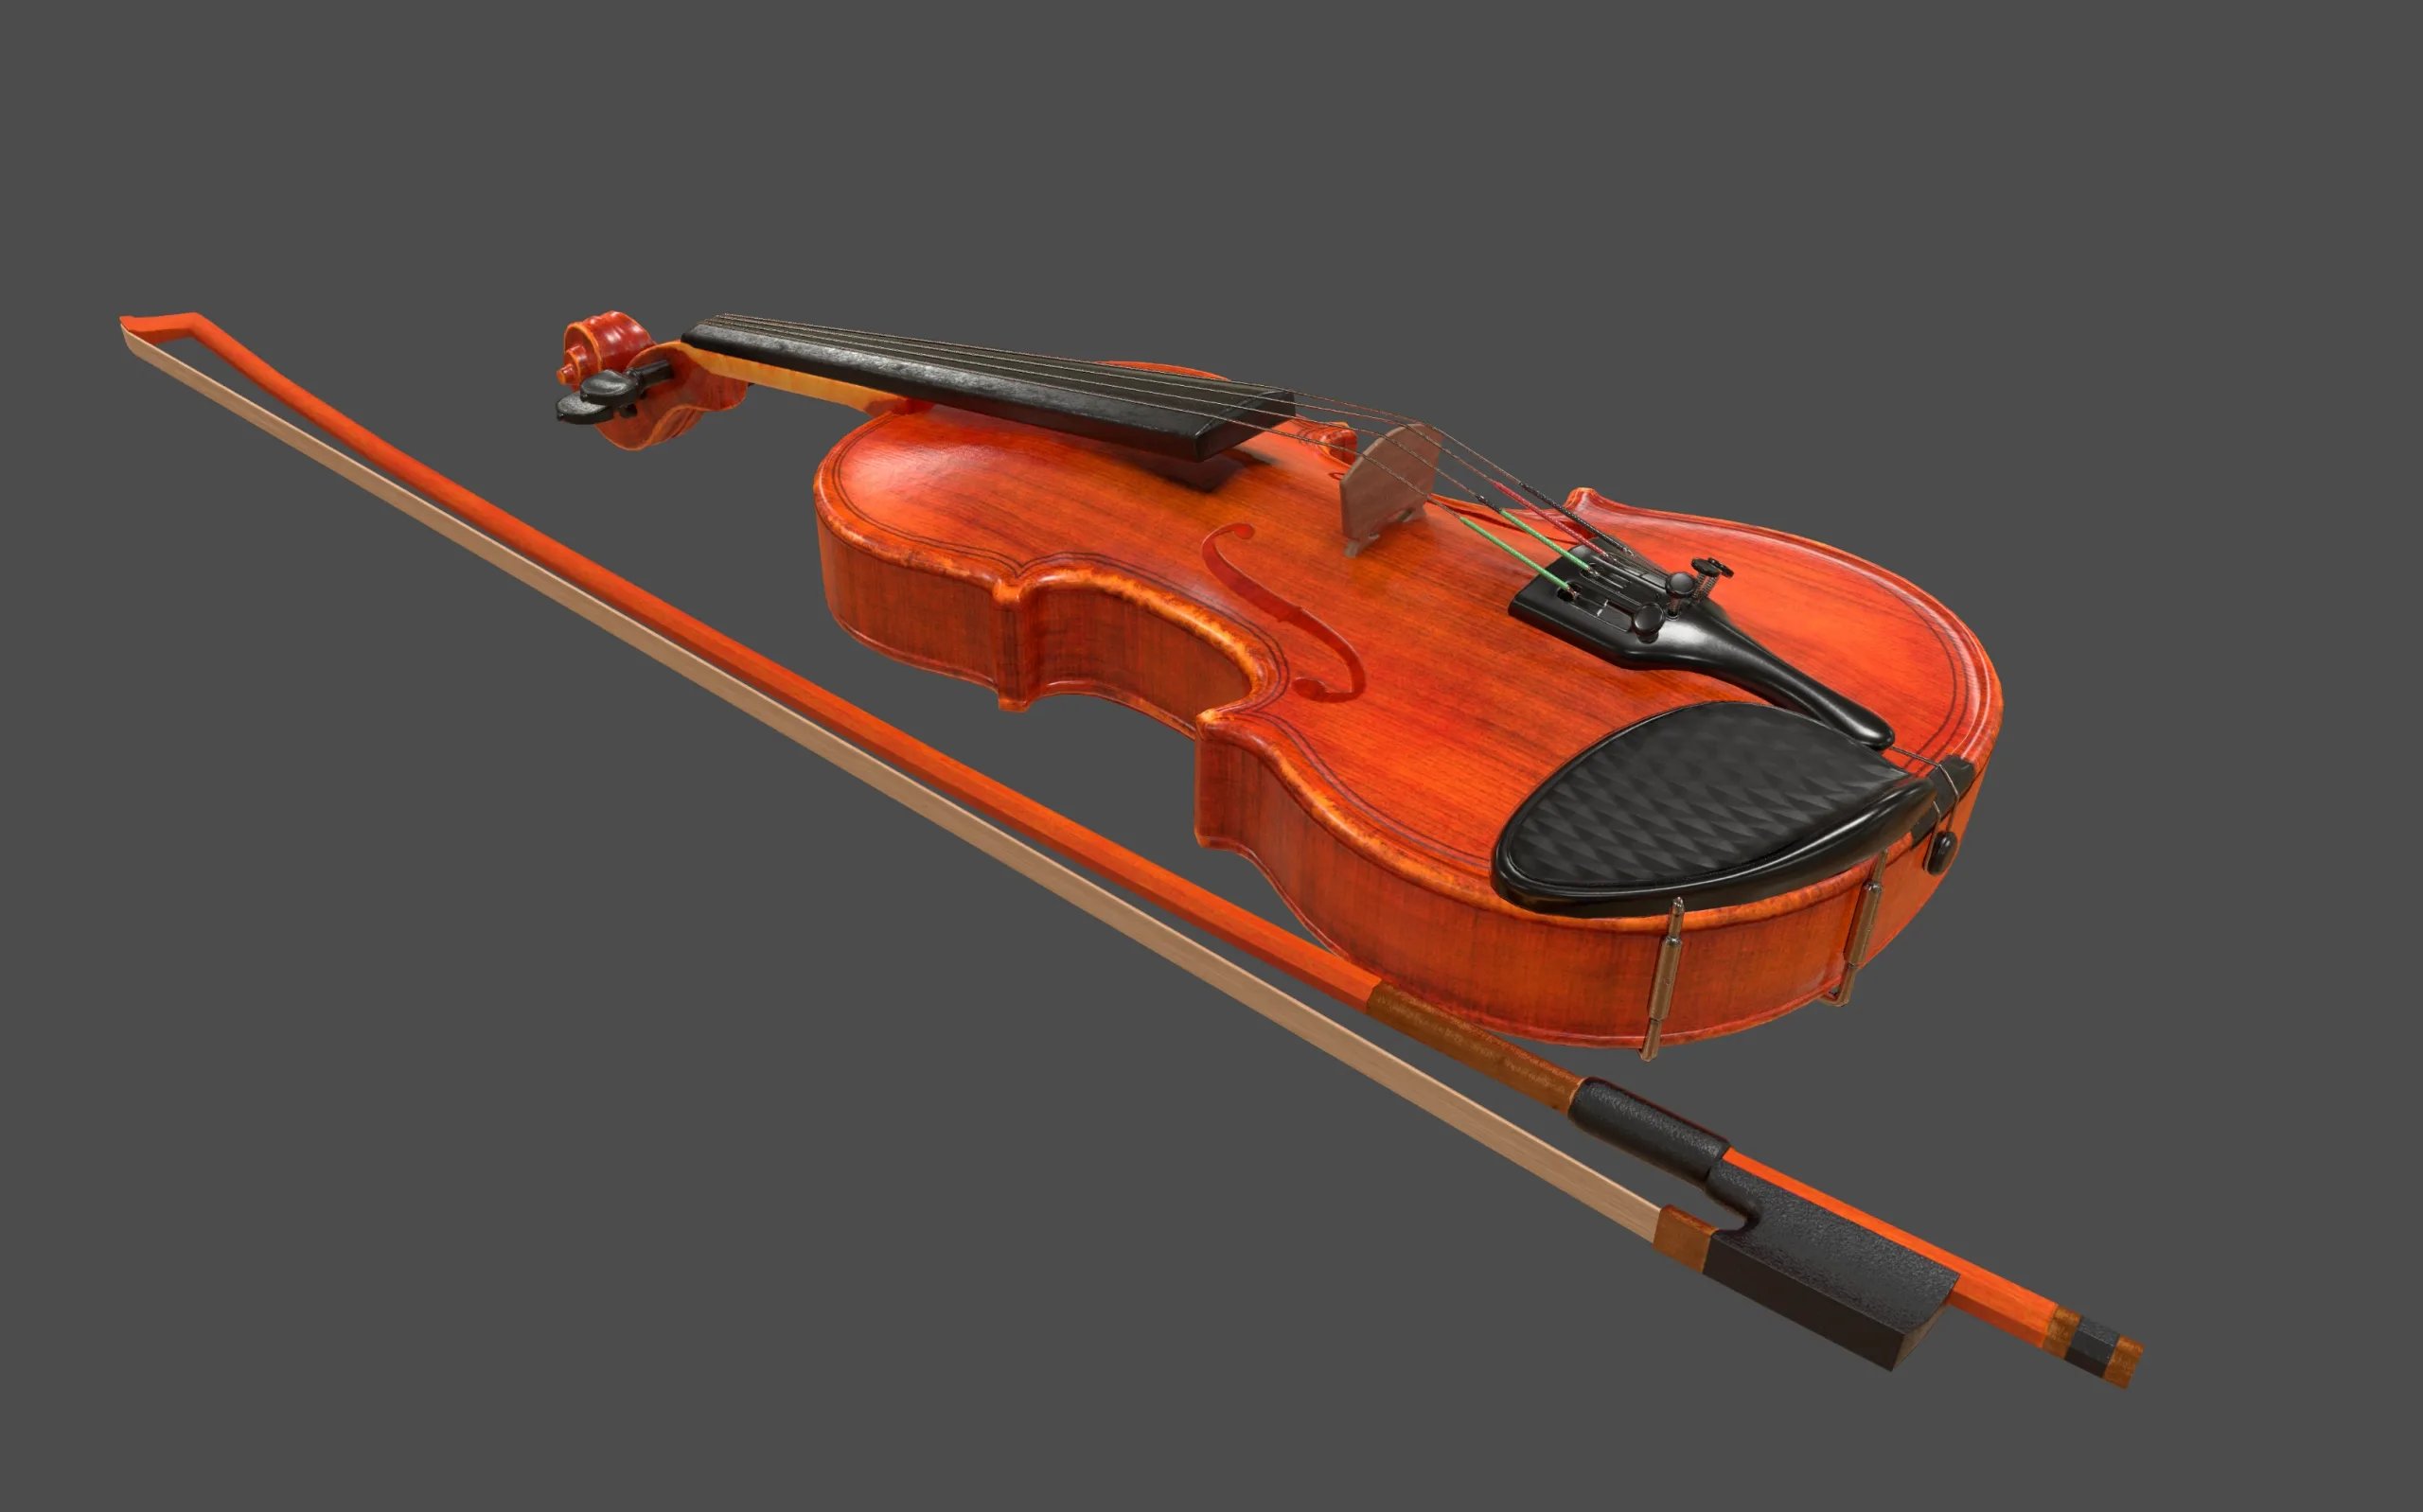 Violin and Bow - Low Poly